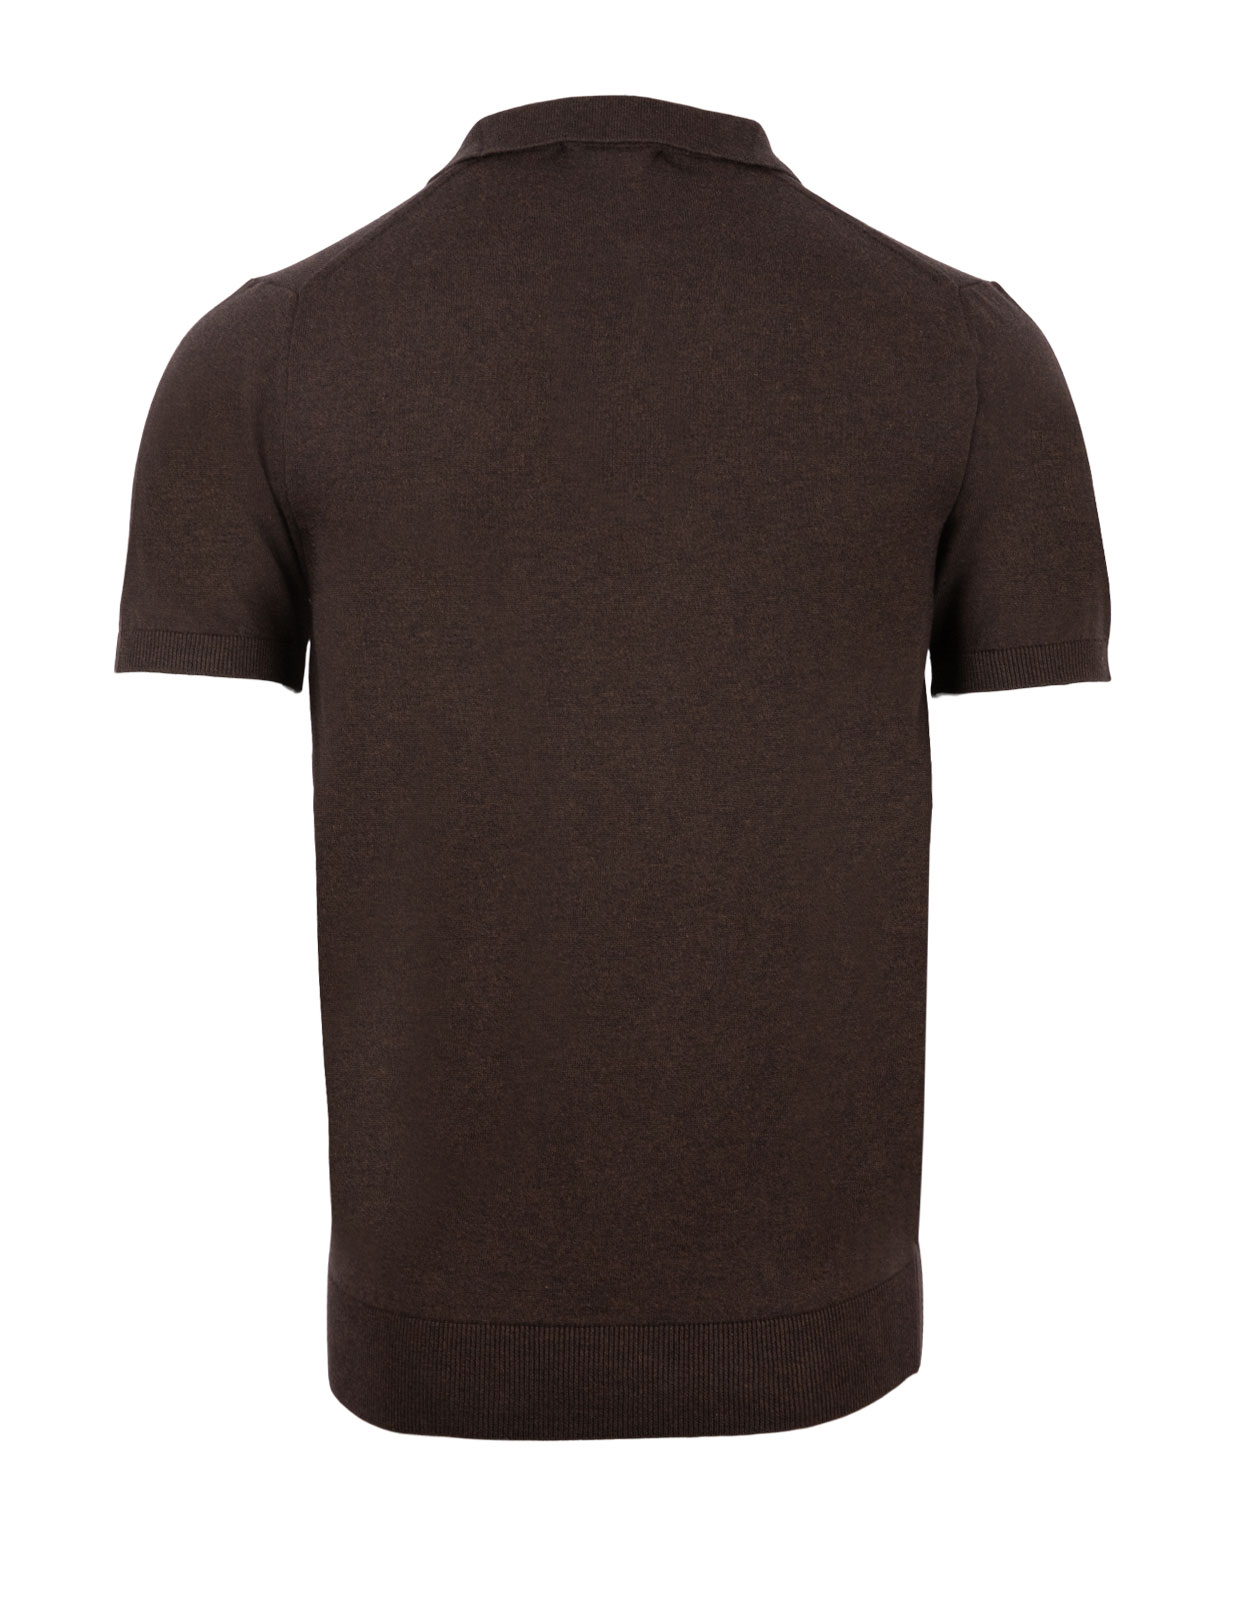 Polo Shirt Knitted Cotton Chocolate